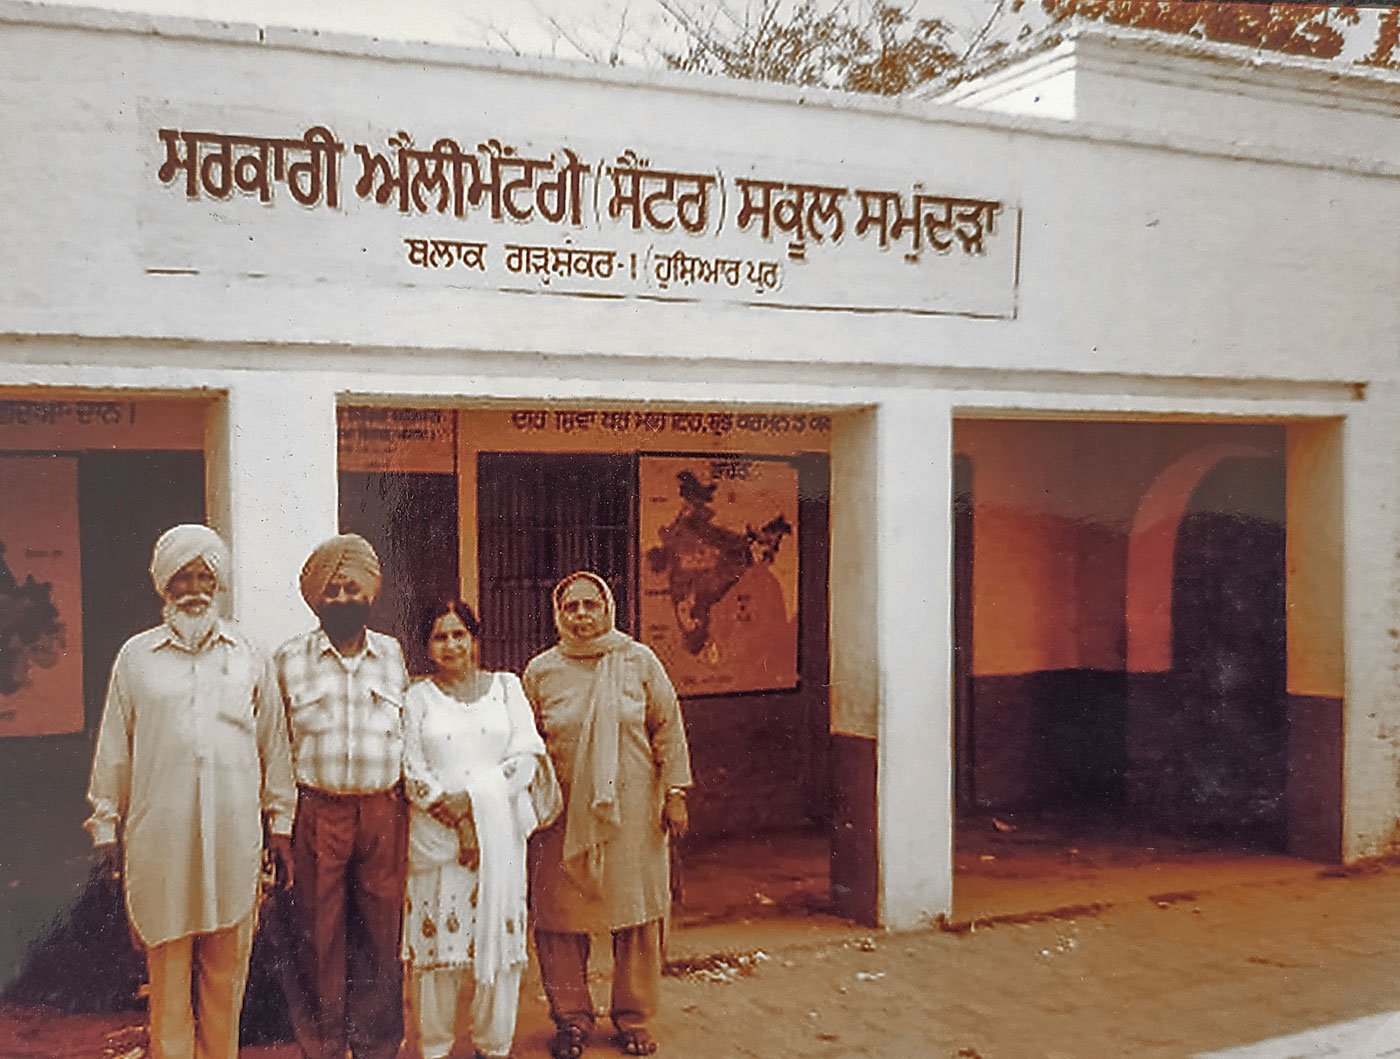 Bhagat Singh Jhuggian and his wife Gurdev Kaur, with two friends in between them, stand in front of the school, since renovated, that threw him out in 1939